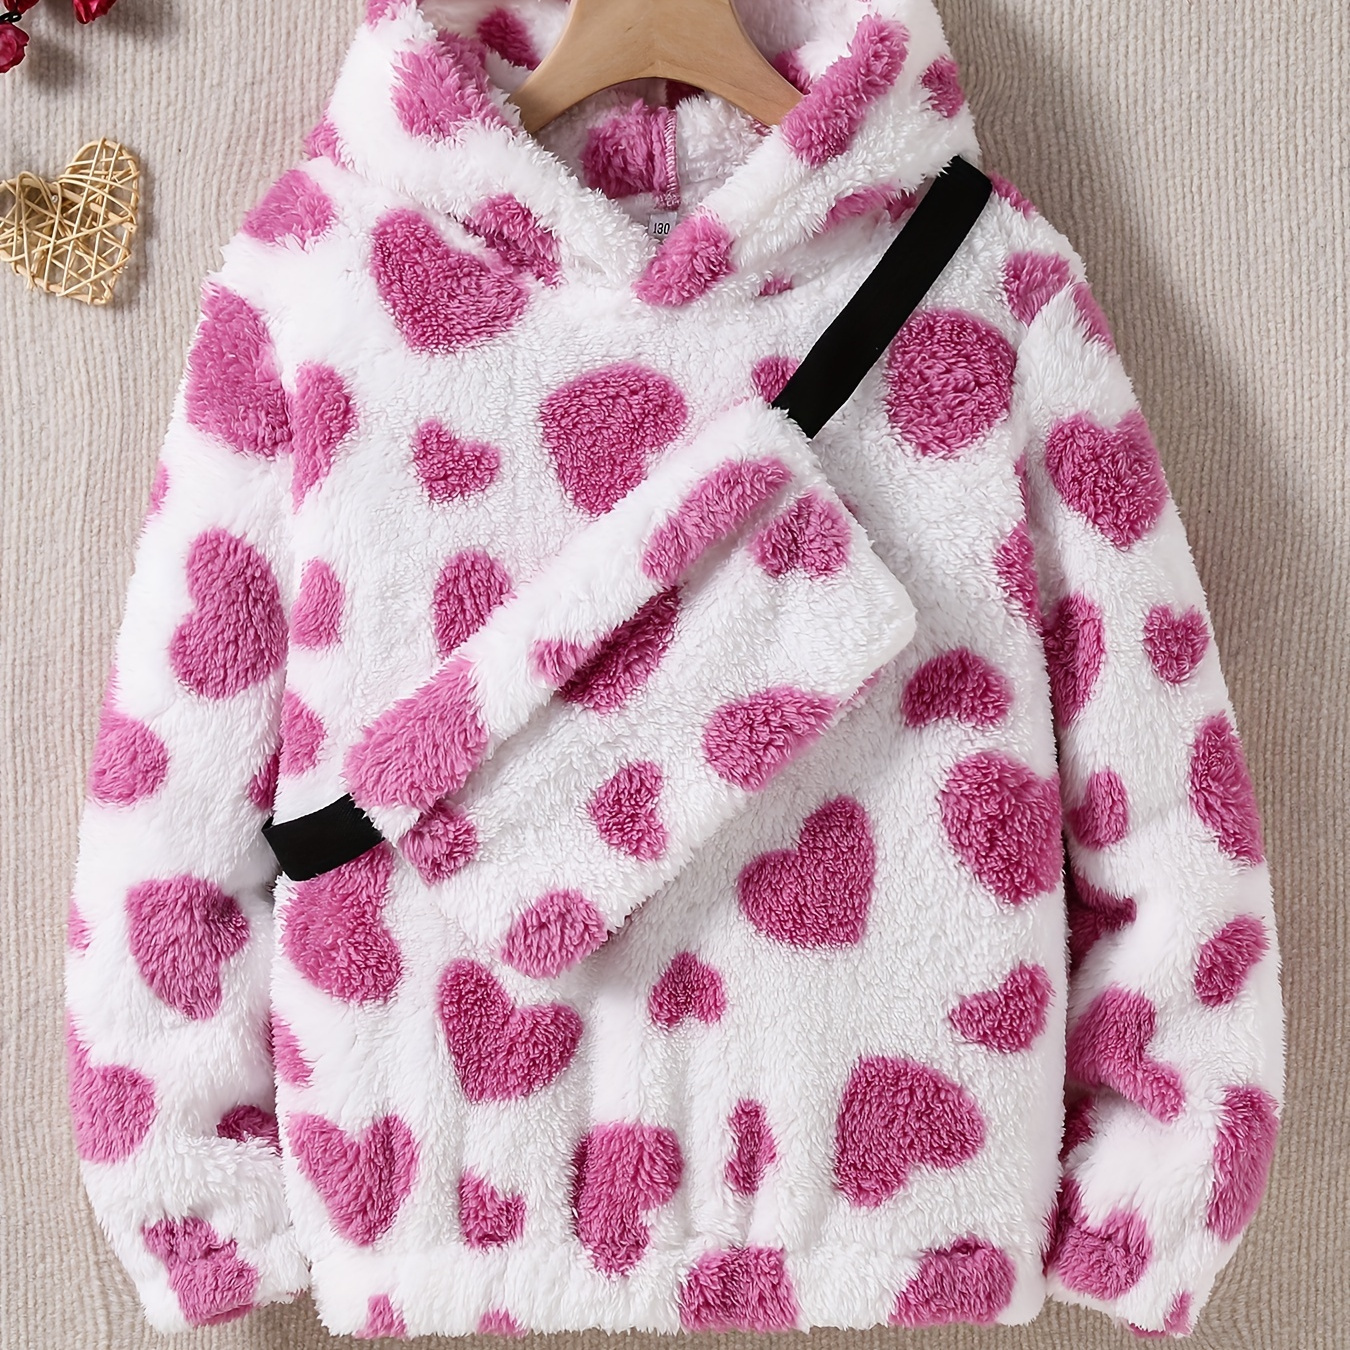 

Fluffy Sweatshirts For Girls Fashion Round Neck Pullover Heart Dot Blouse Comfy Recreational Long Sleeve Tops With A Fluffy Bag